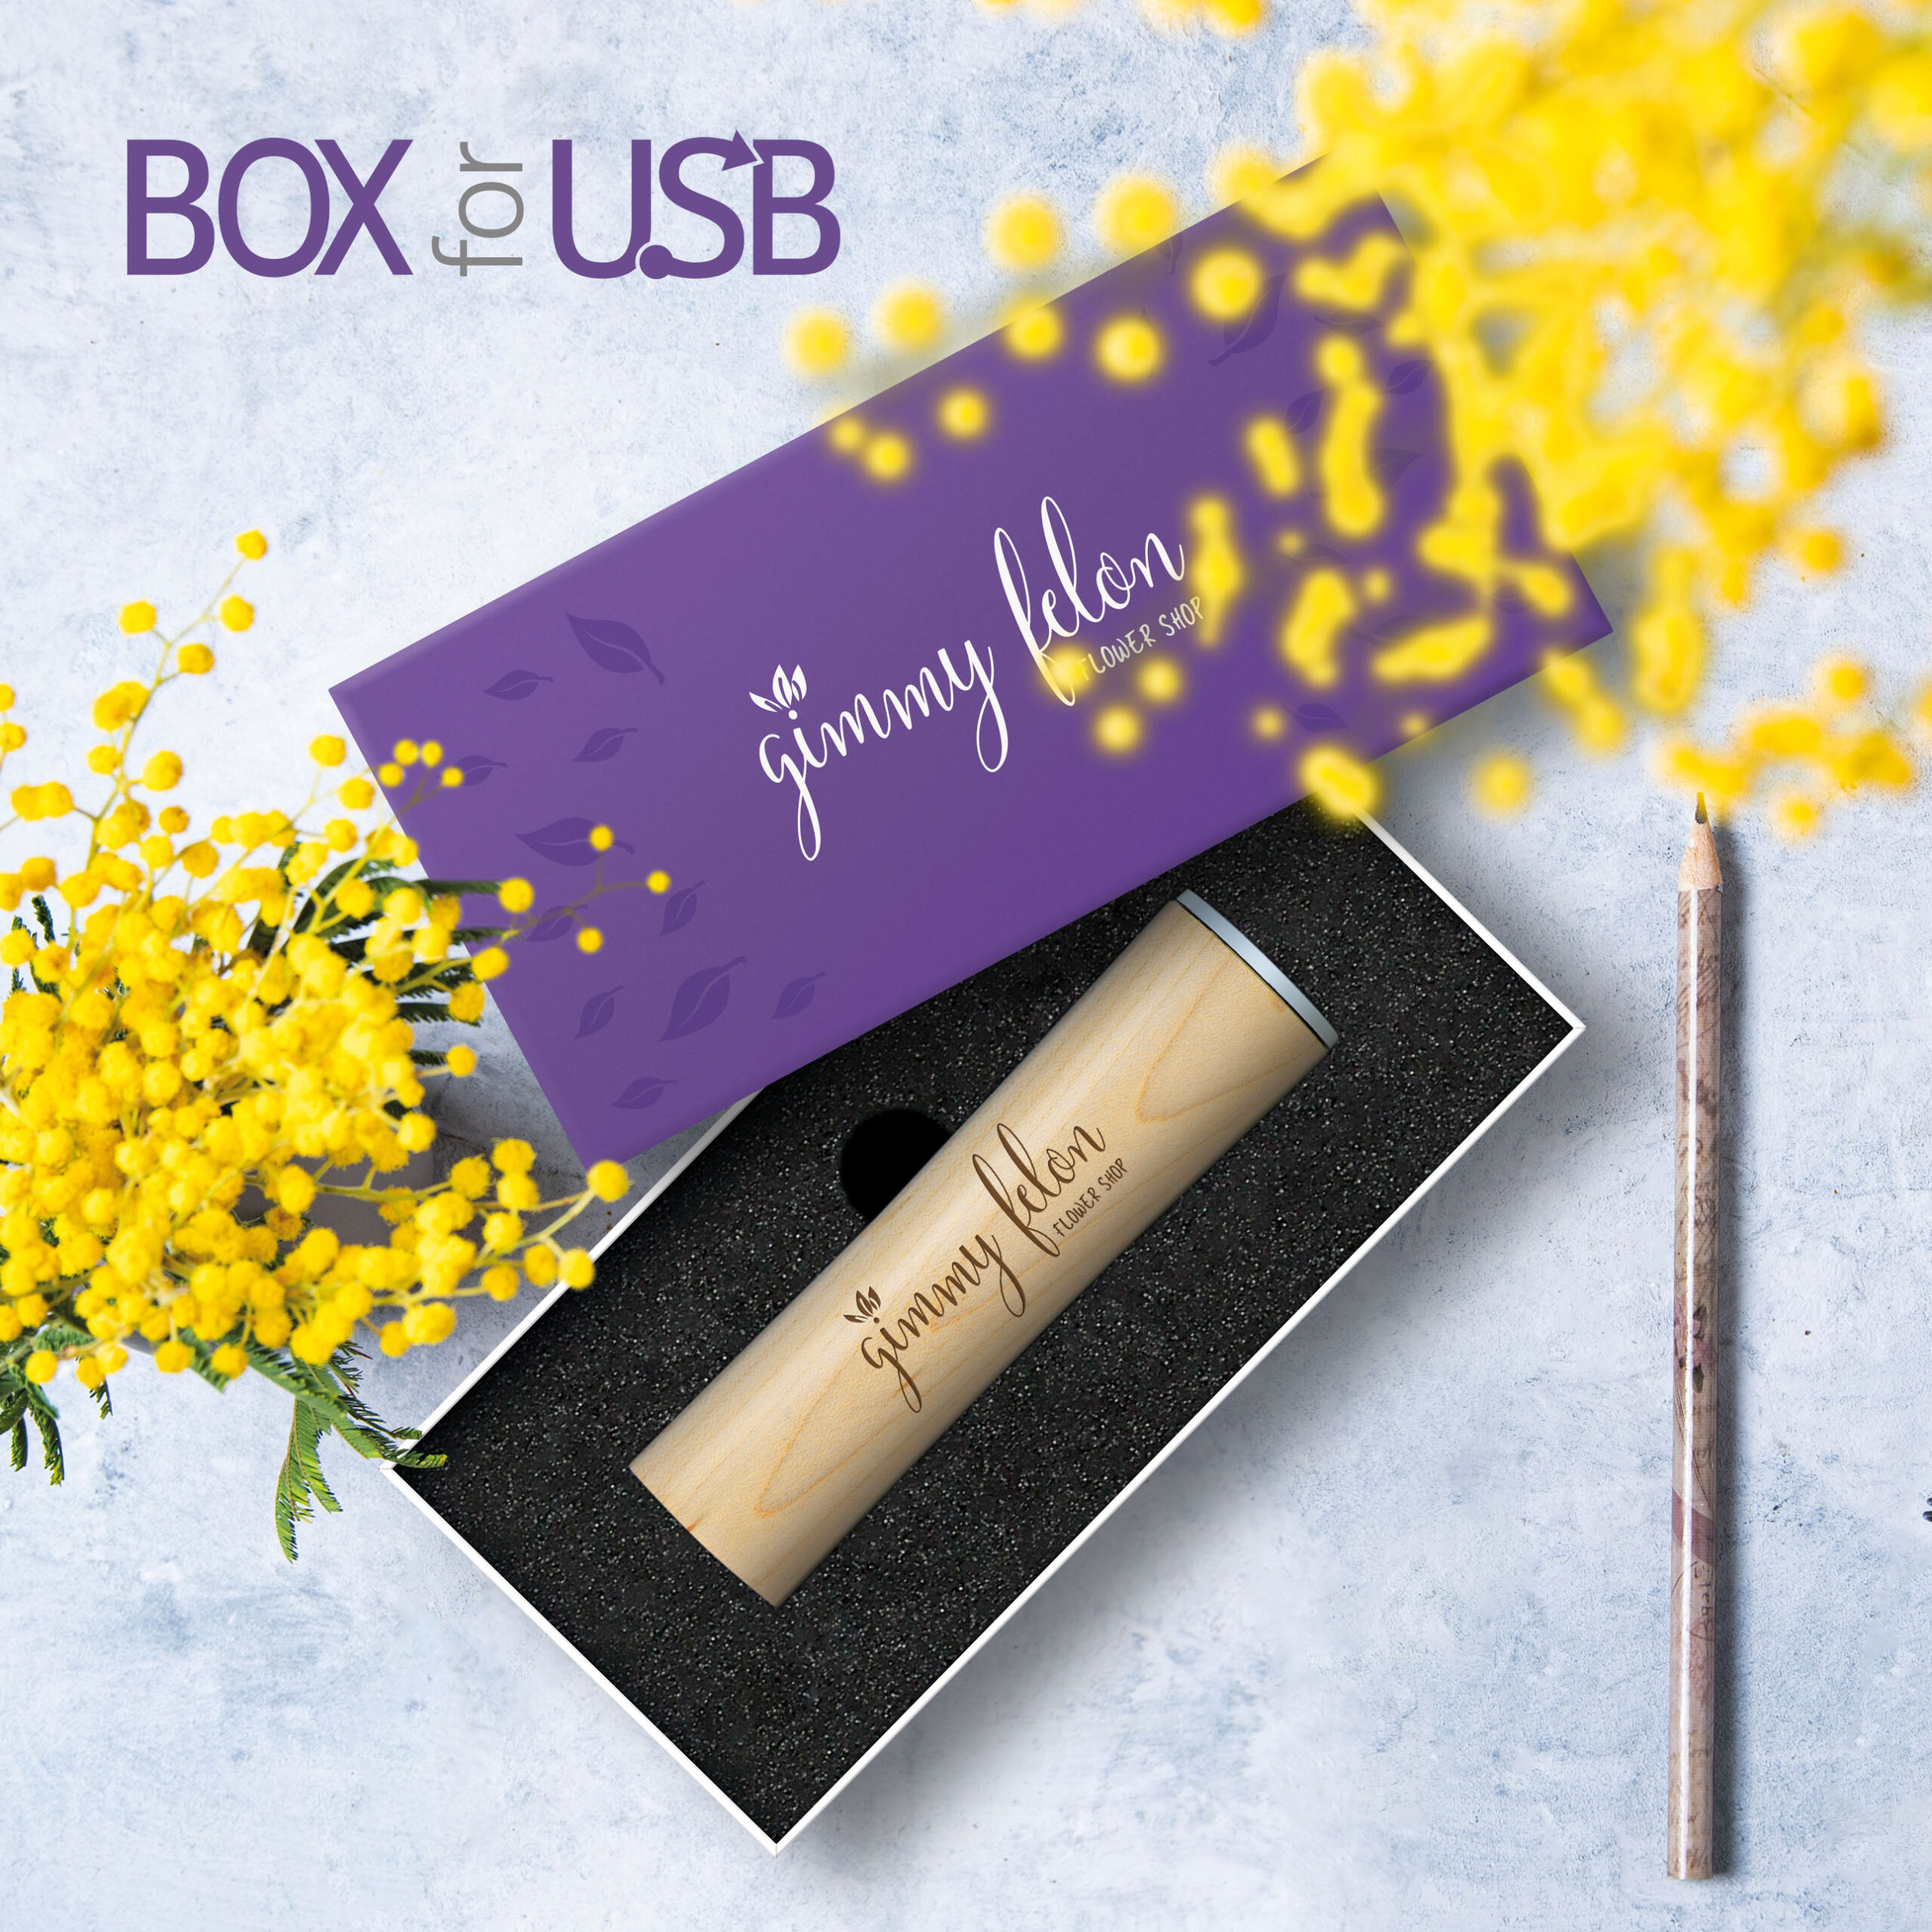 BOX for USB – personalized packaging for USB flash drives and gift sets perfectly tailored to the needs of your customers